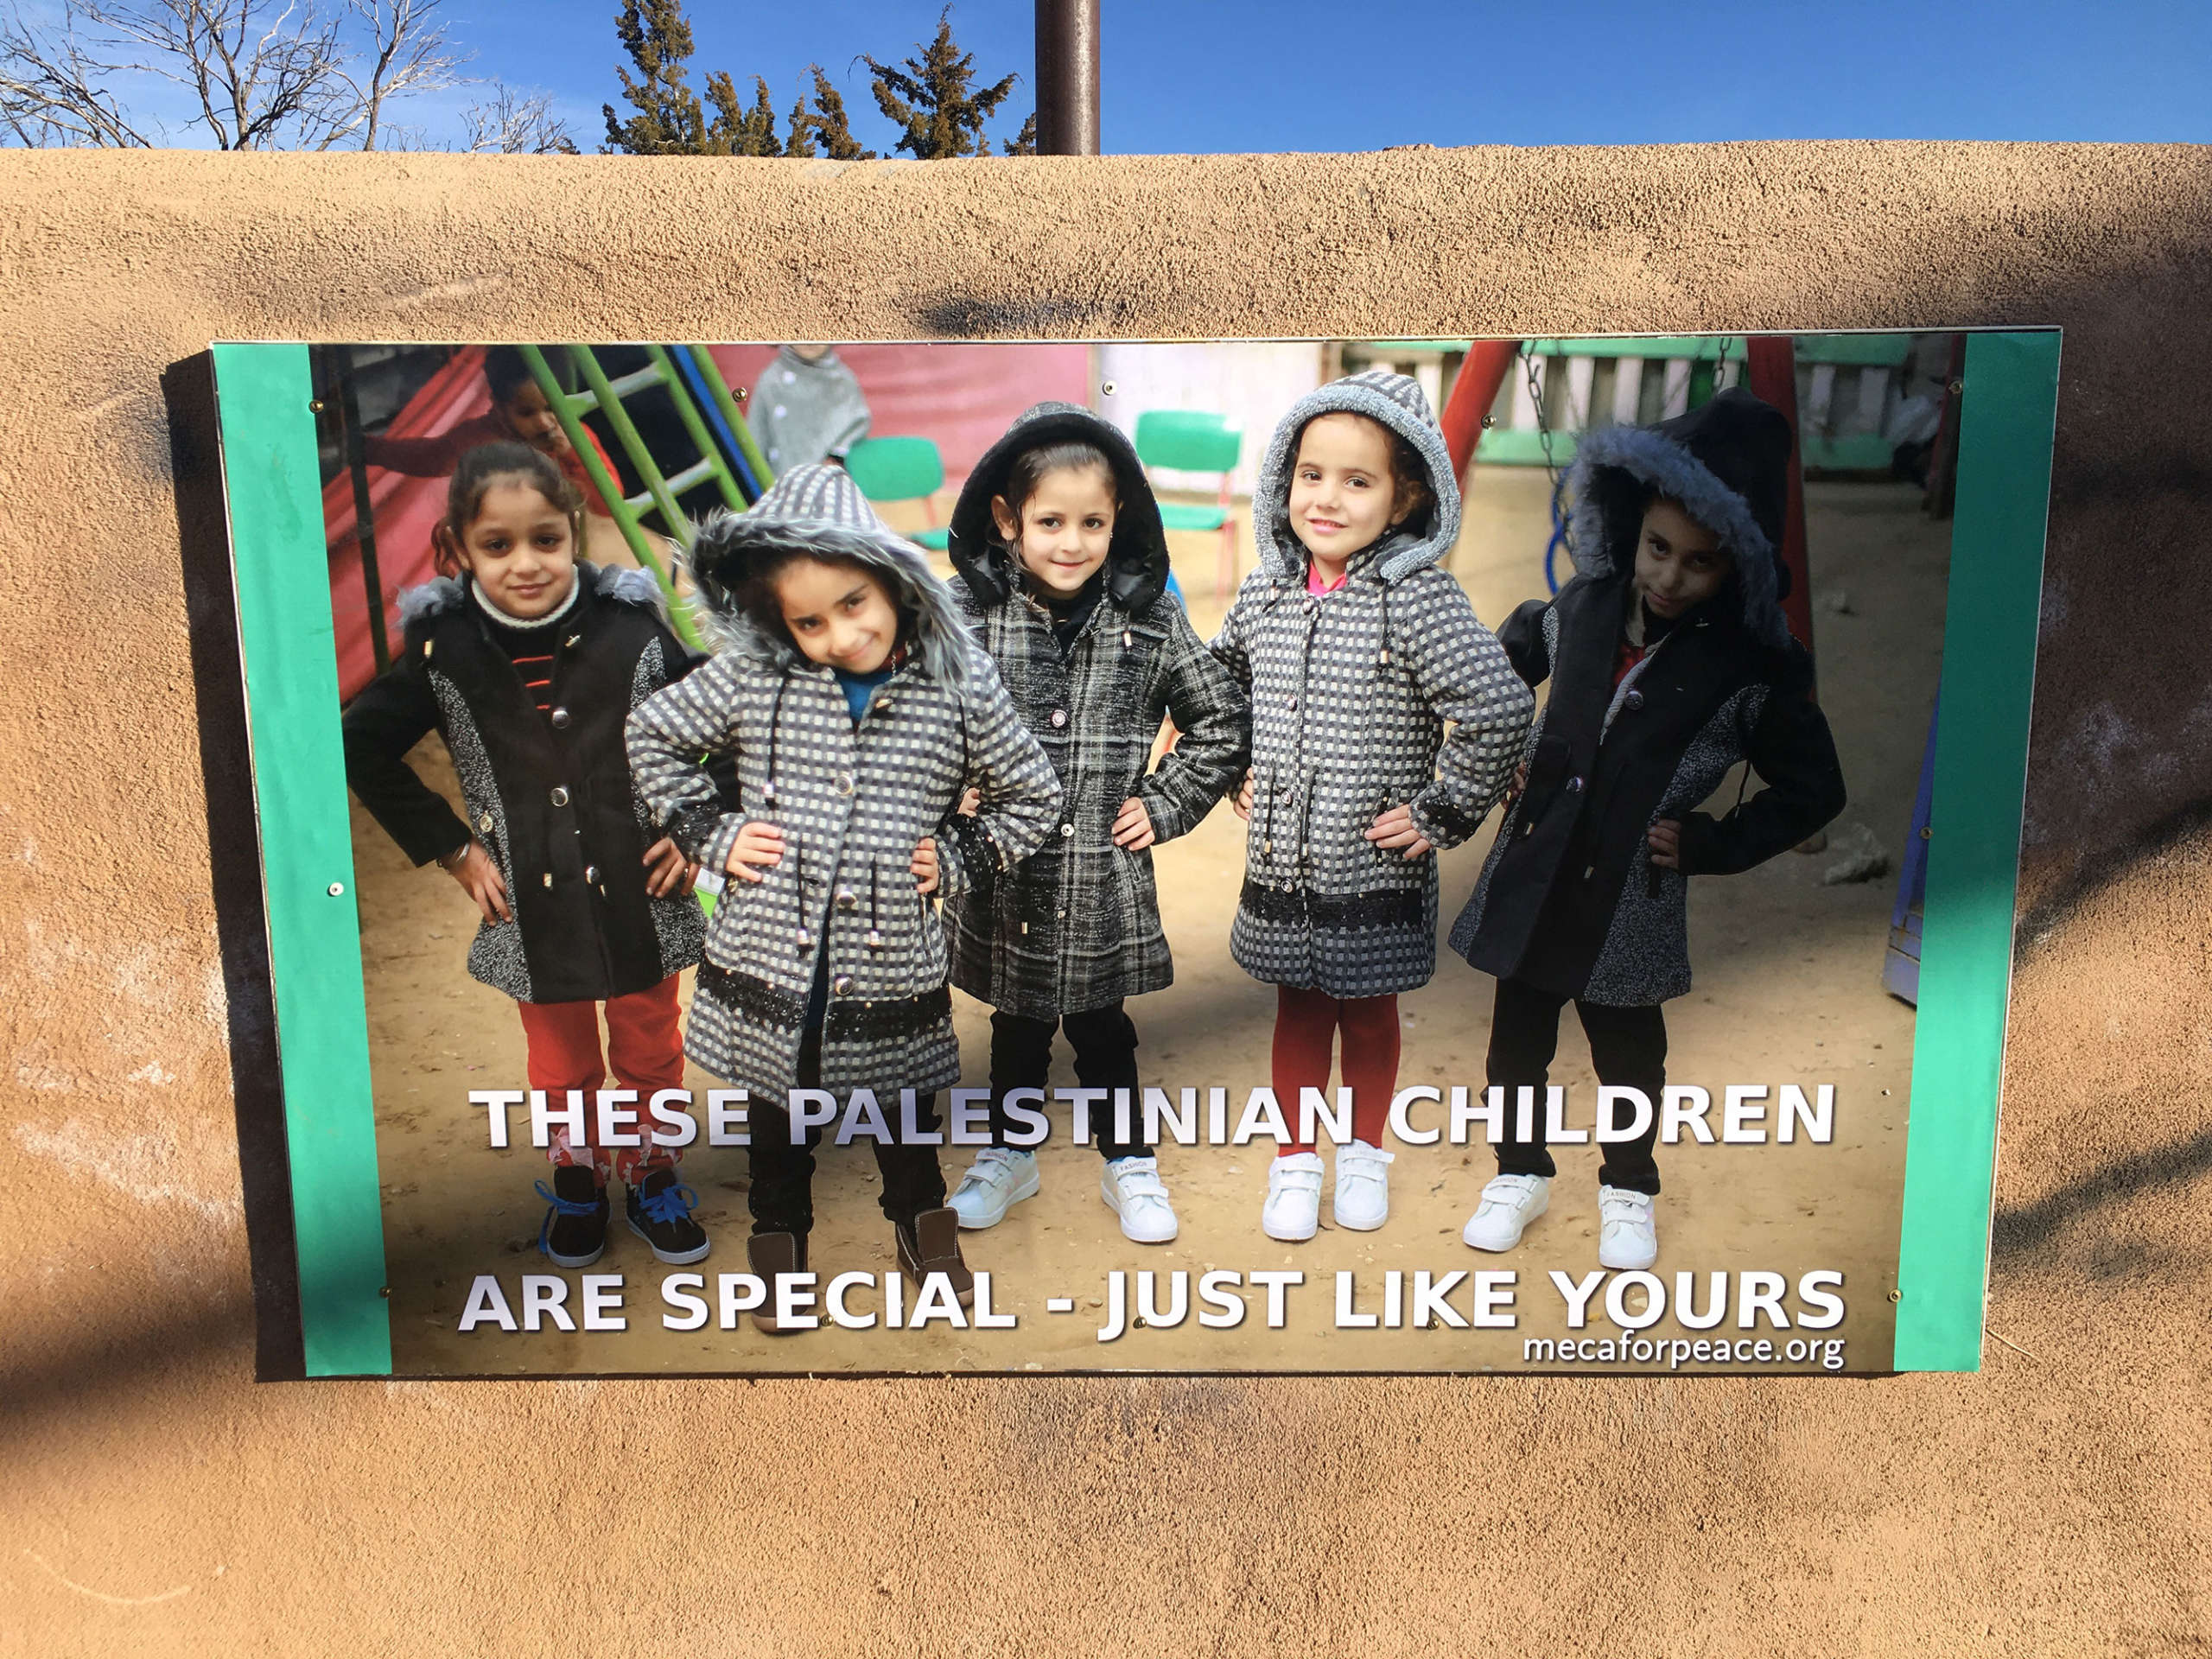 A sign displays five 6-year-old Palestinian girls in winter coats with the caption, These Palestinian Children Are Just Like Yours.